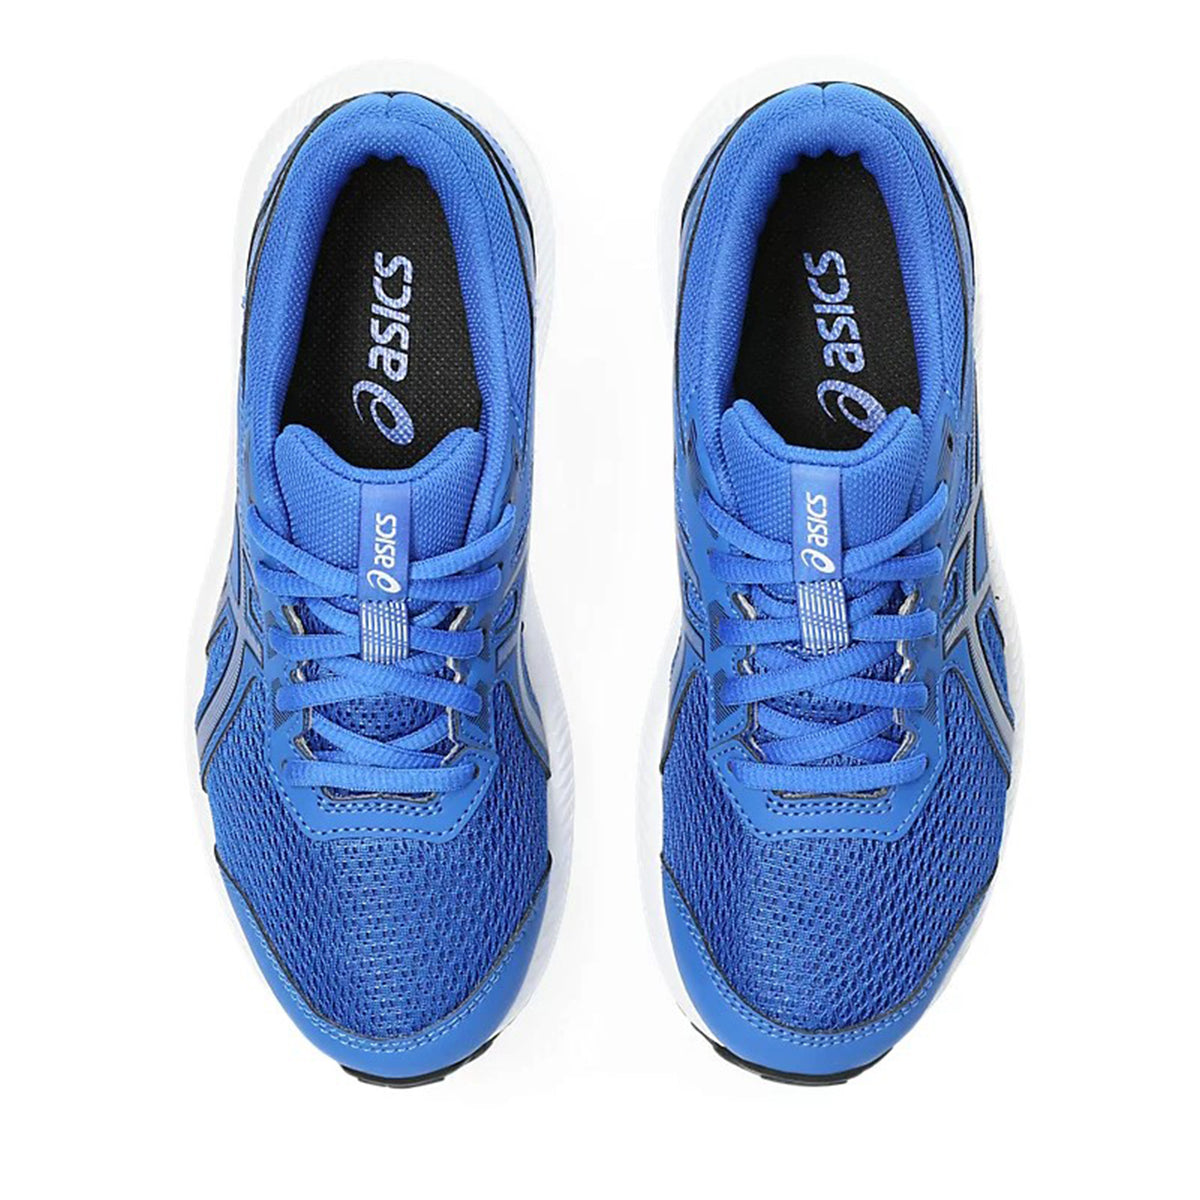 Asics Contend 8 Kids Running Shoes: Illusion Blue/Pure Silver